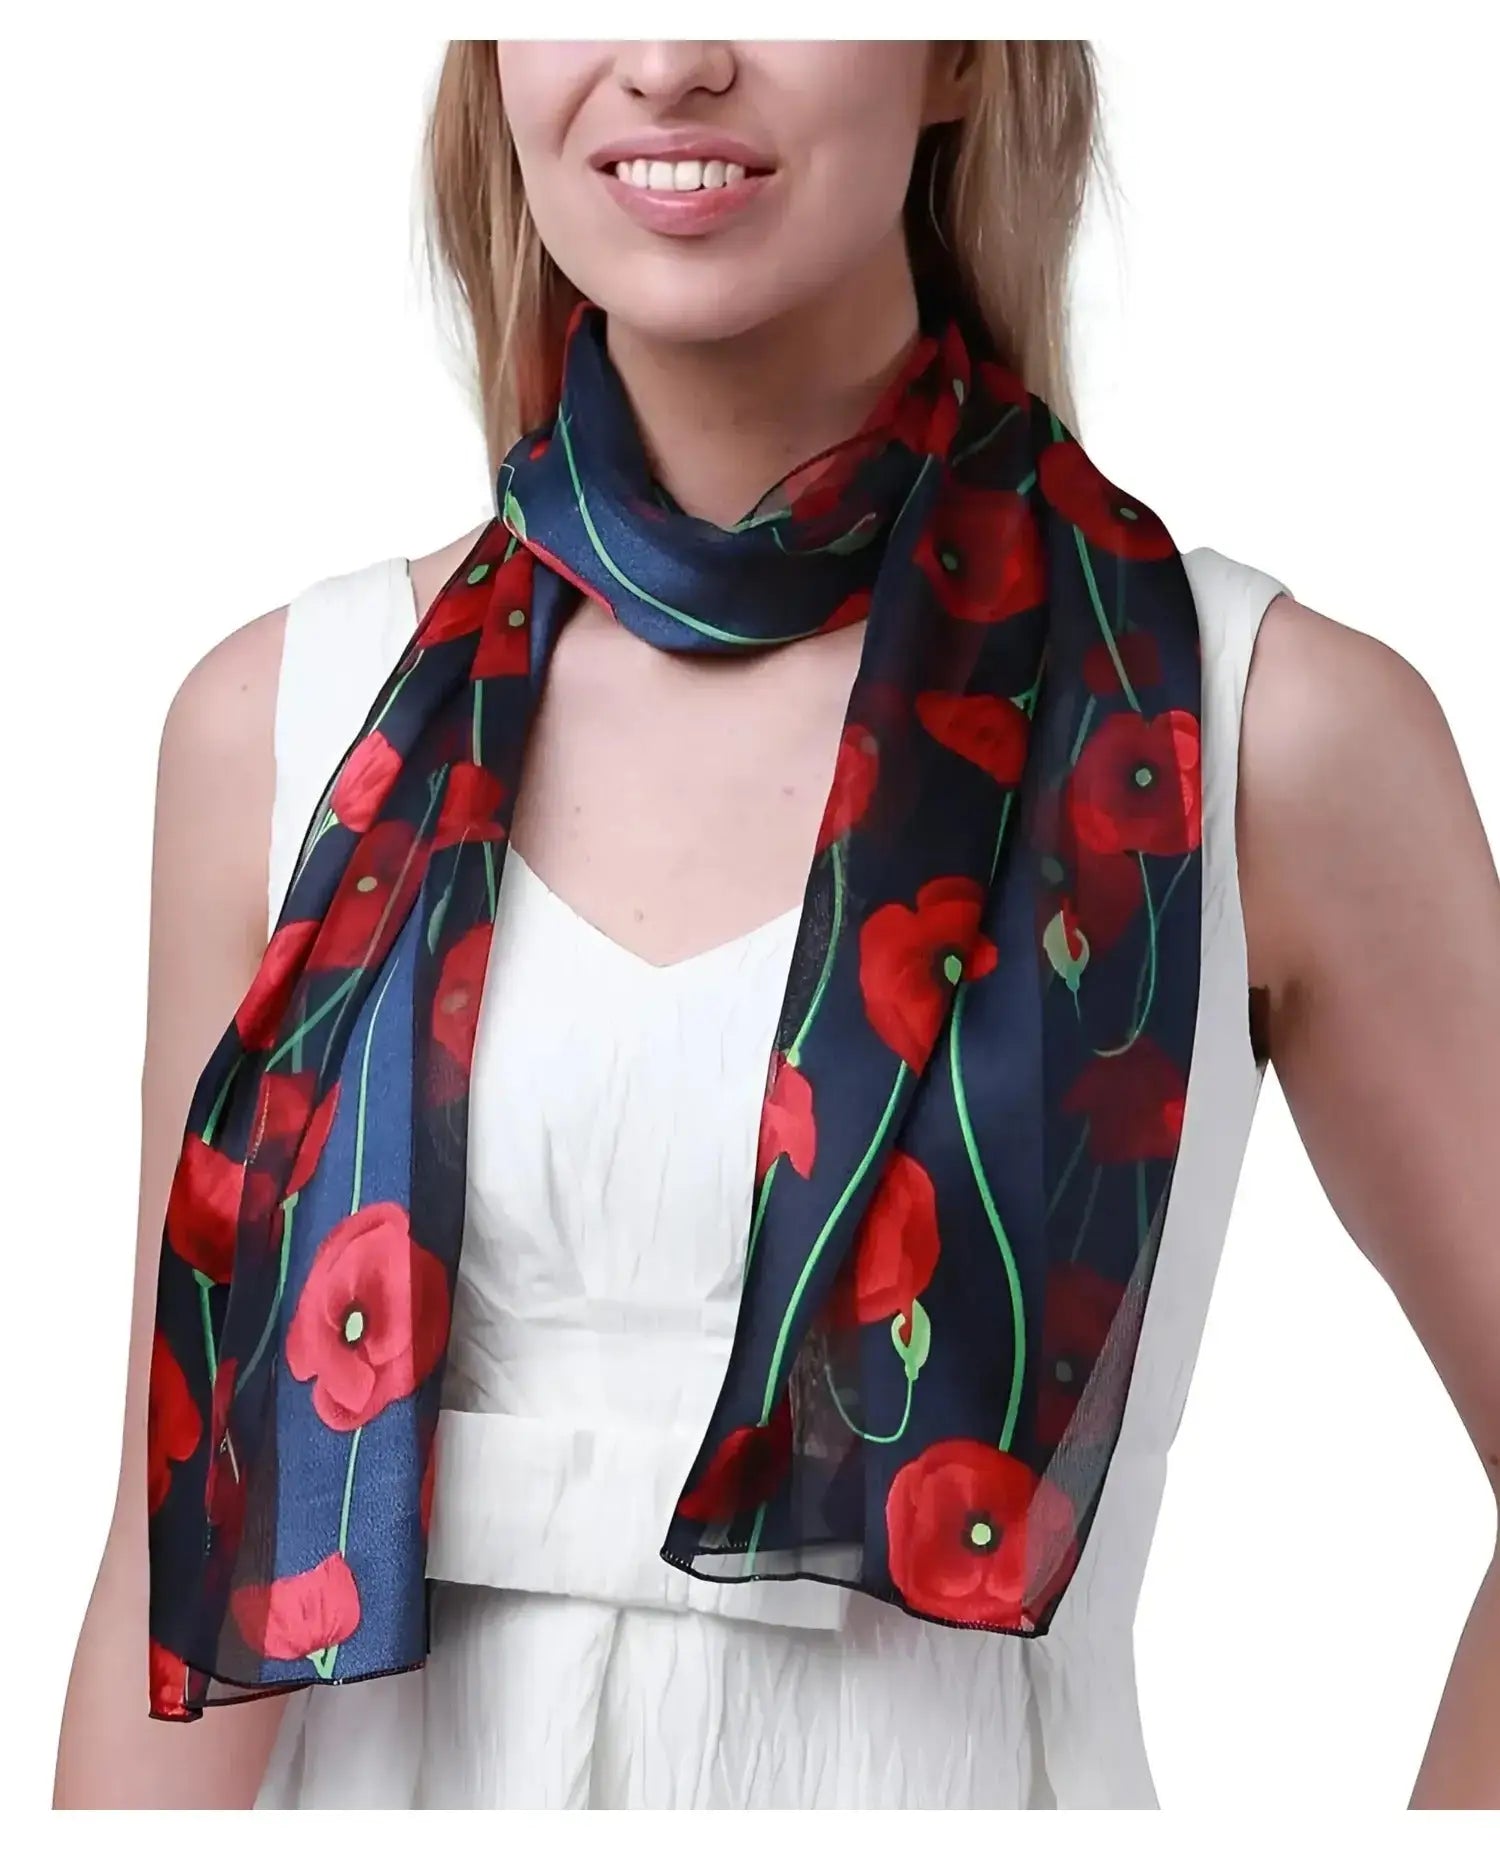 Woman wearing red and blue poppy floral print scarf.